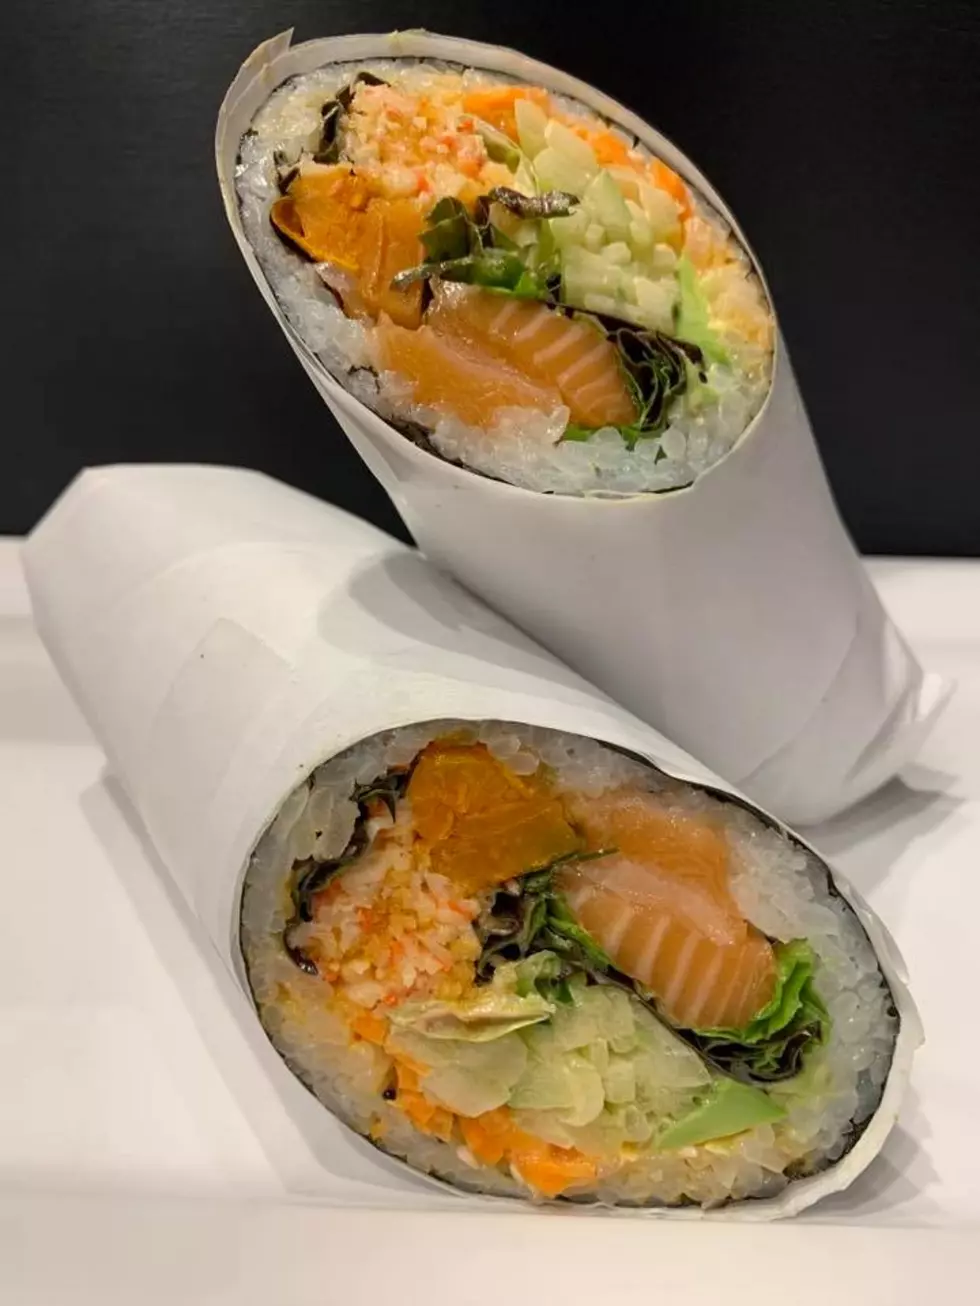 Sushi Burritos are a Real Thing in Rockford